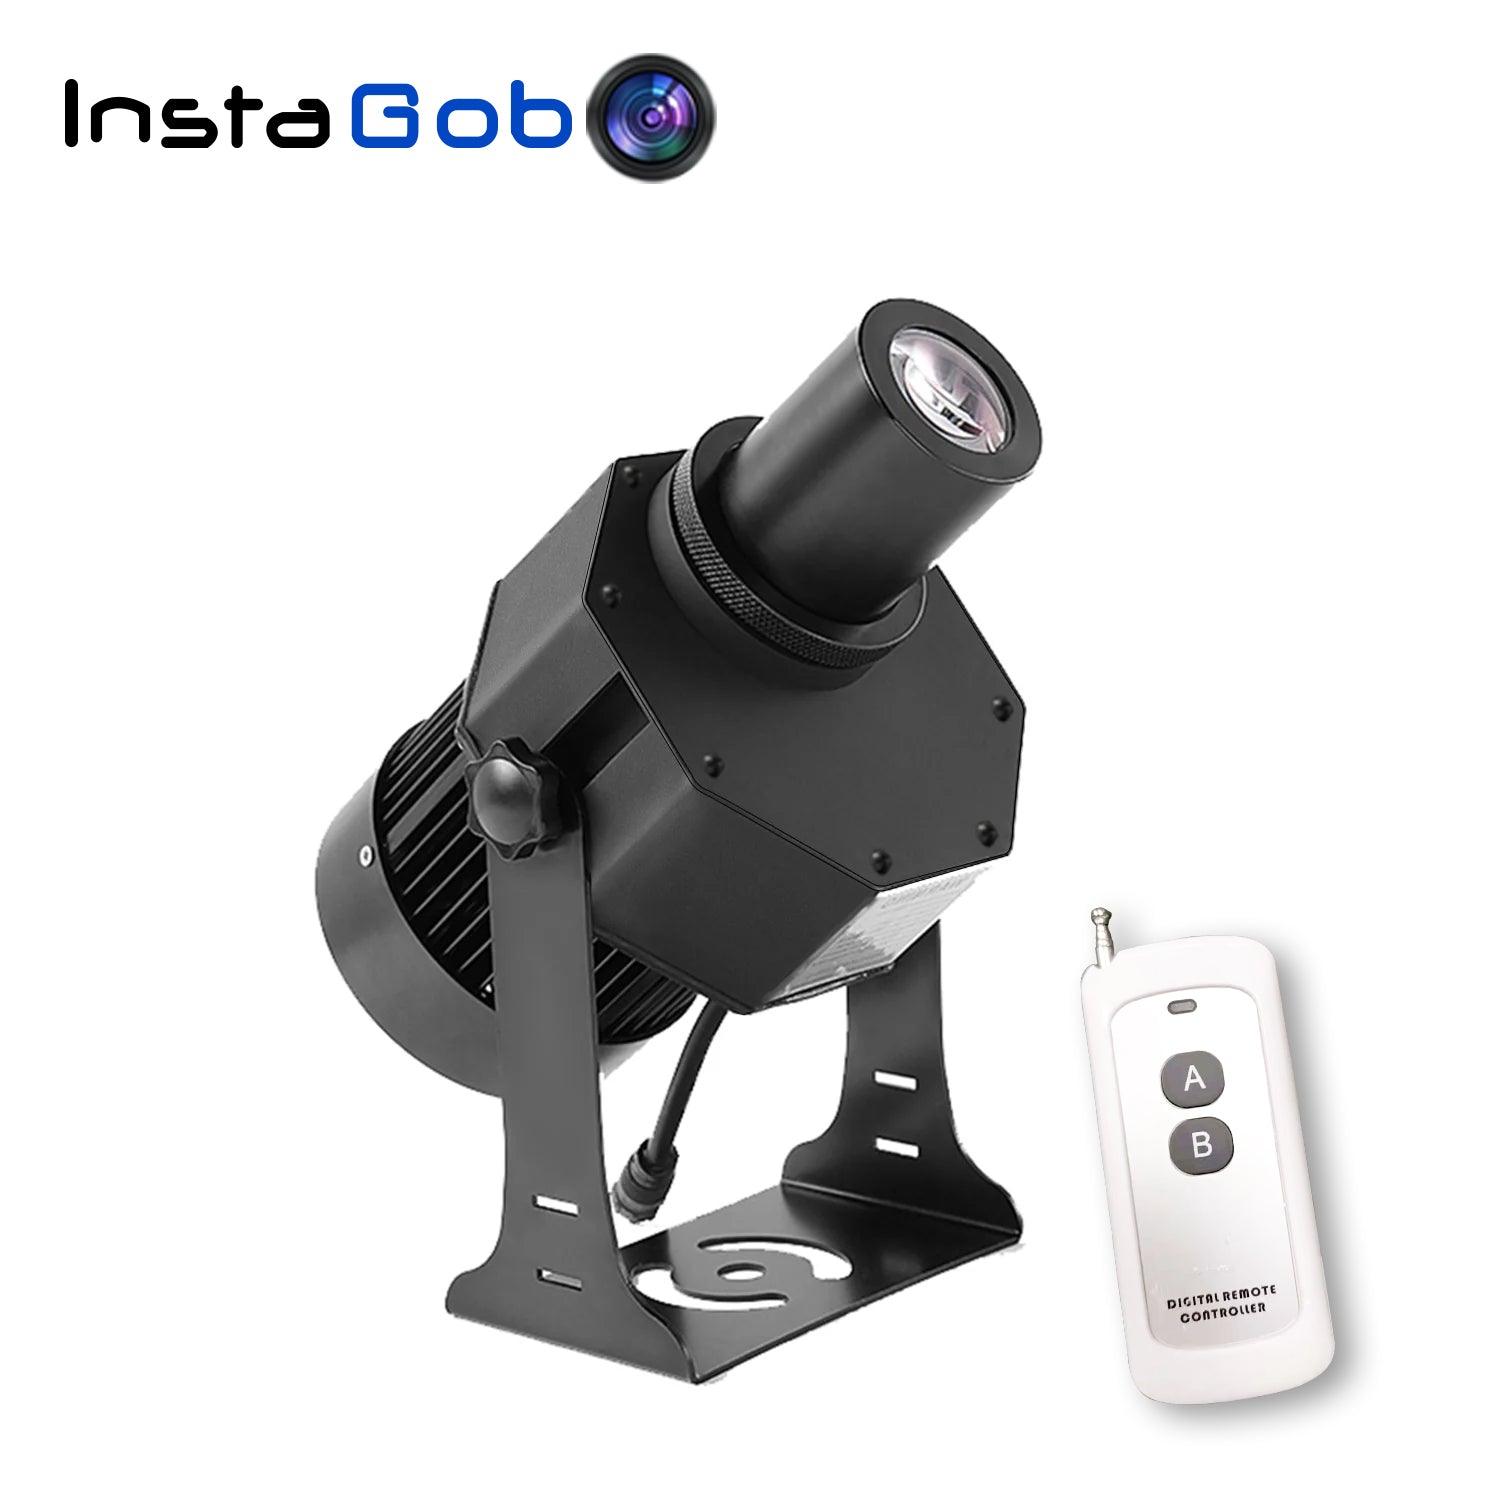 80W LED Logo GOBO Projector Ip67 Waterproof DJ Effect Light Including Free Custom Glass GOBO to Project Image for Hotel Company Store Wedding Advertising Indoor and Outdoor Use Instagobo